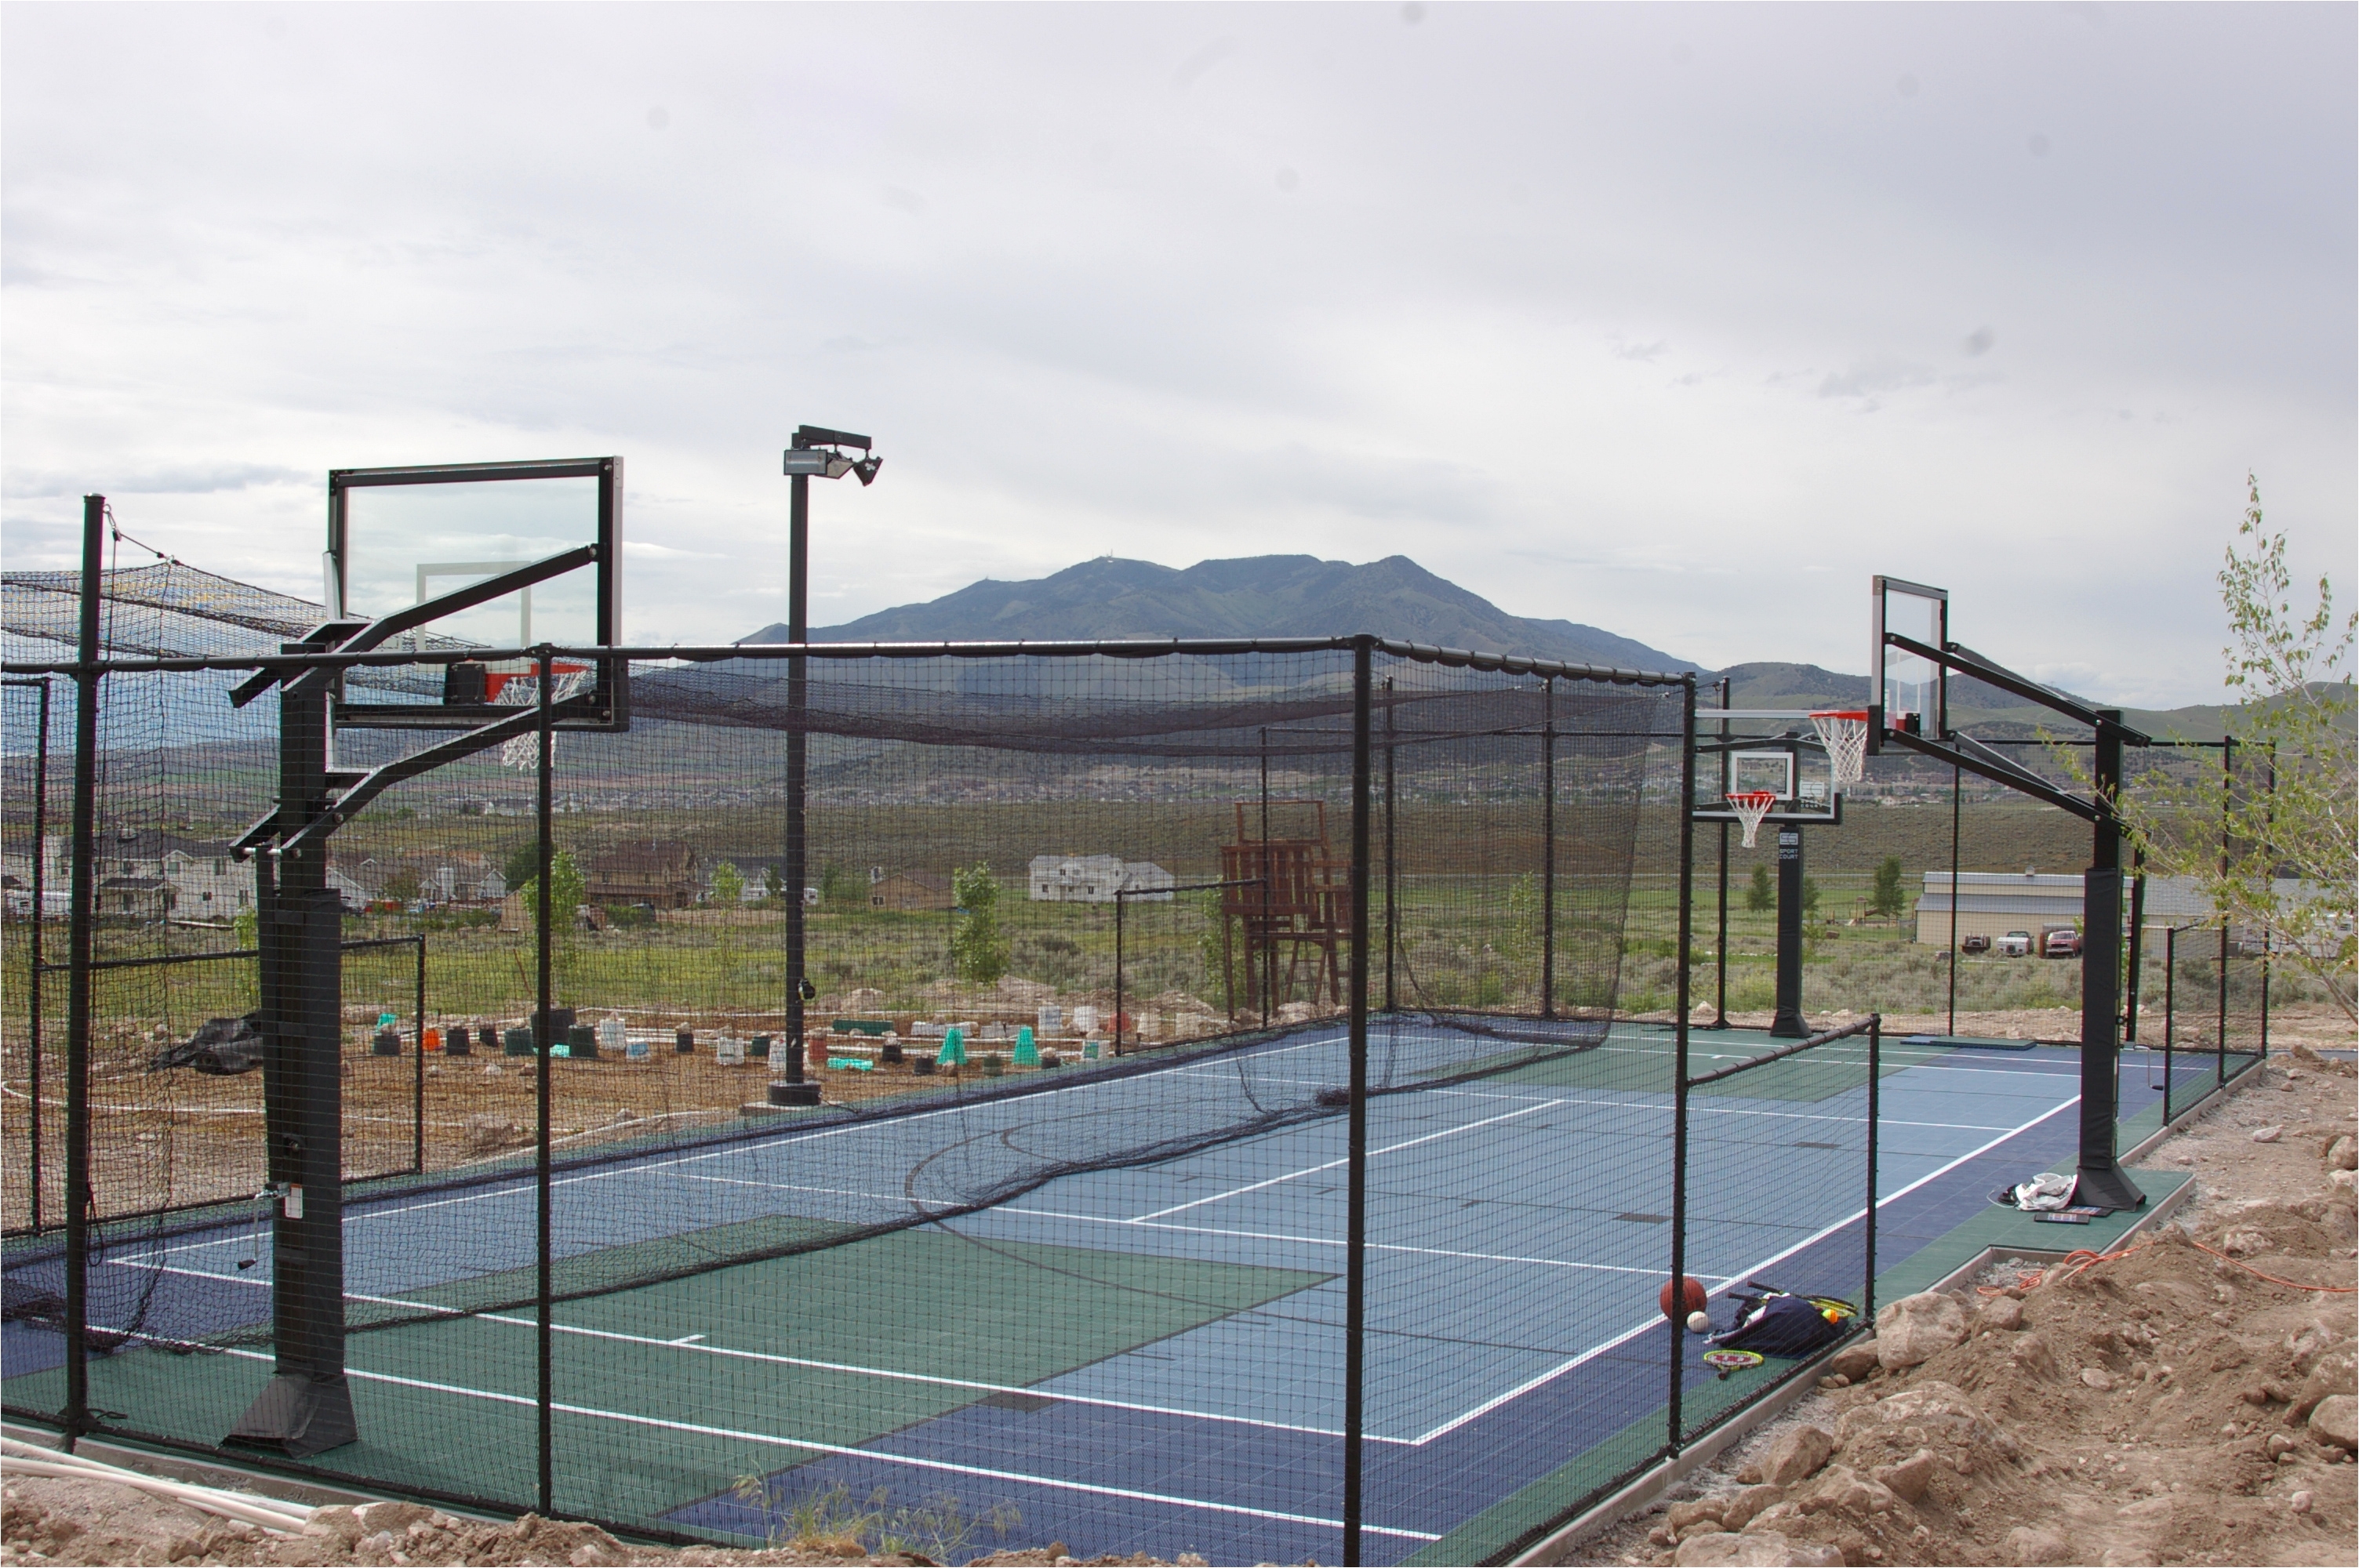 backyard batting cage dimensions the best backyard batting cage dimensions graphics